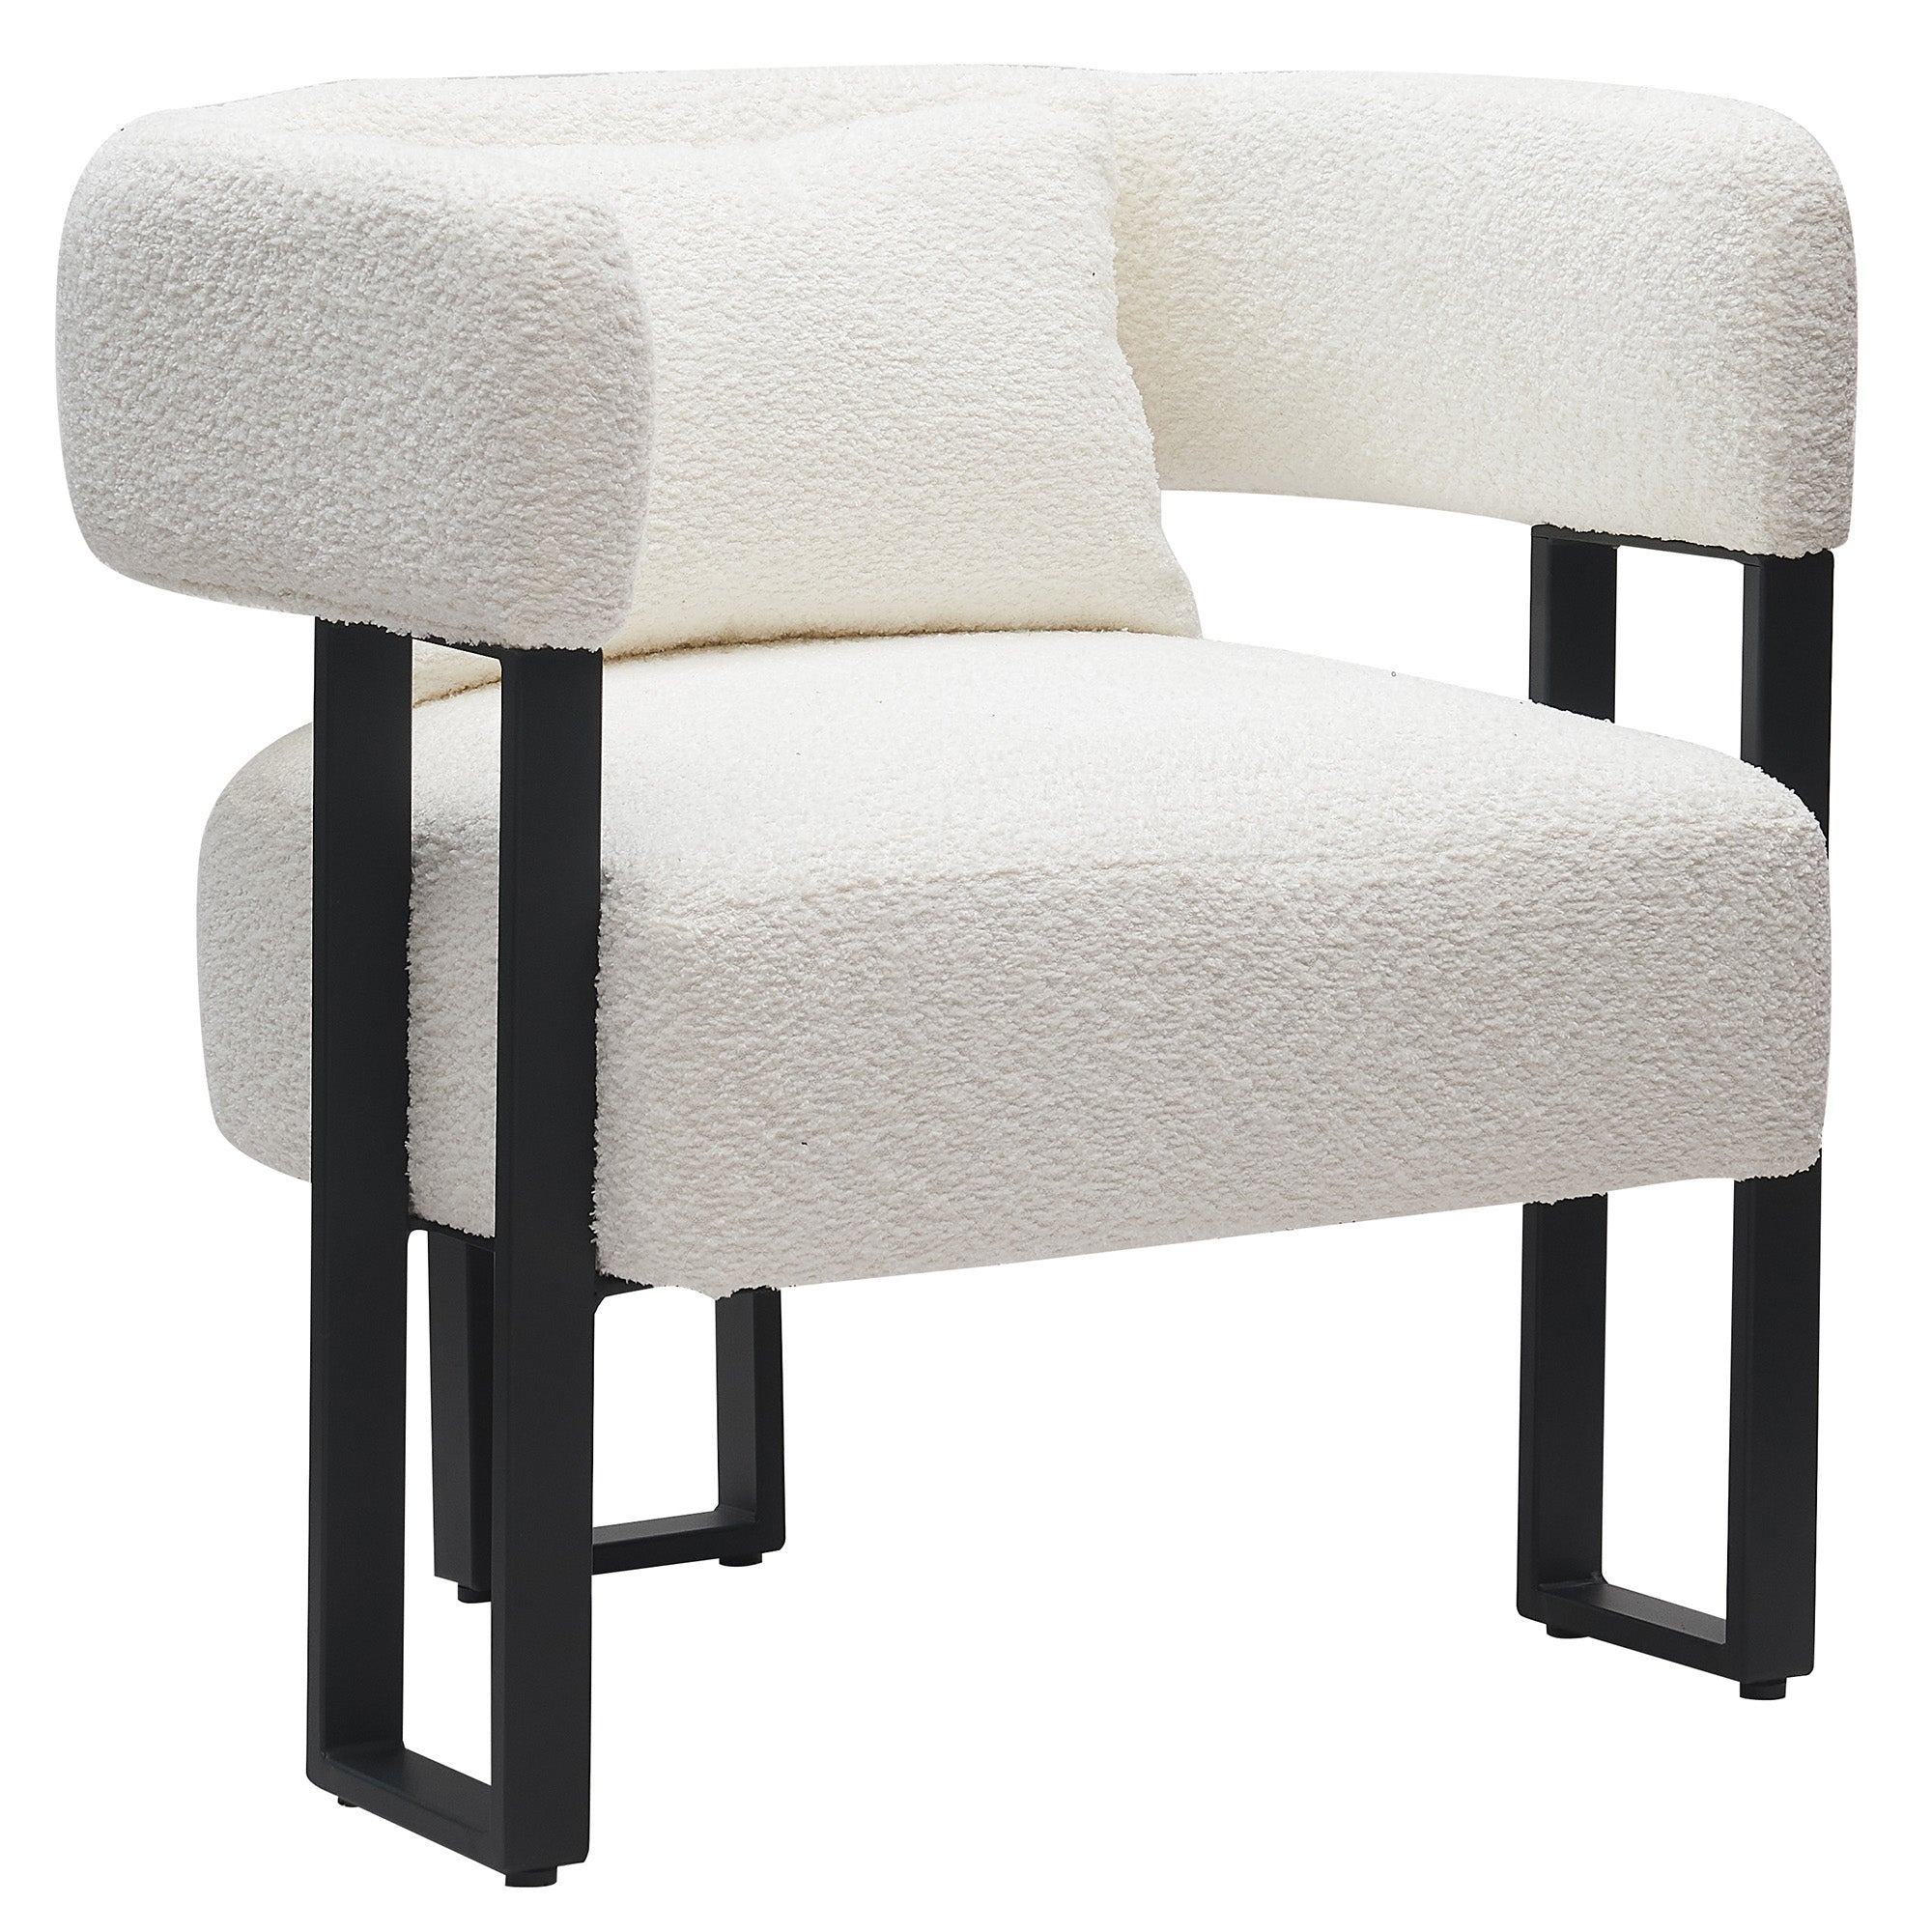 SCARLET-ACCENT CHAIR-IVORY